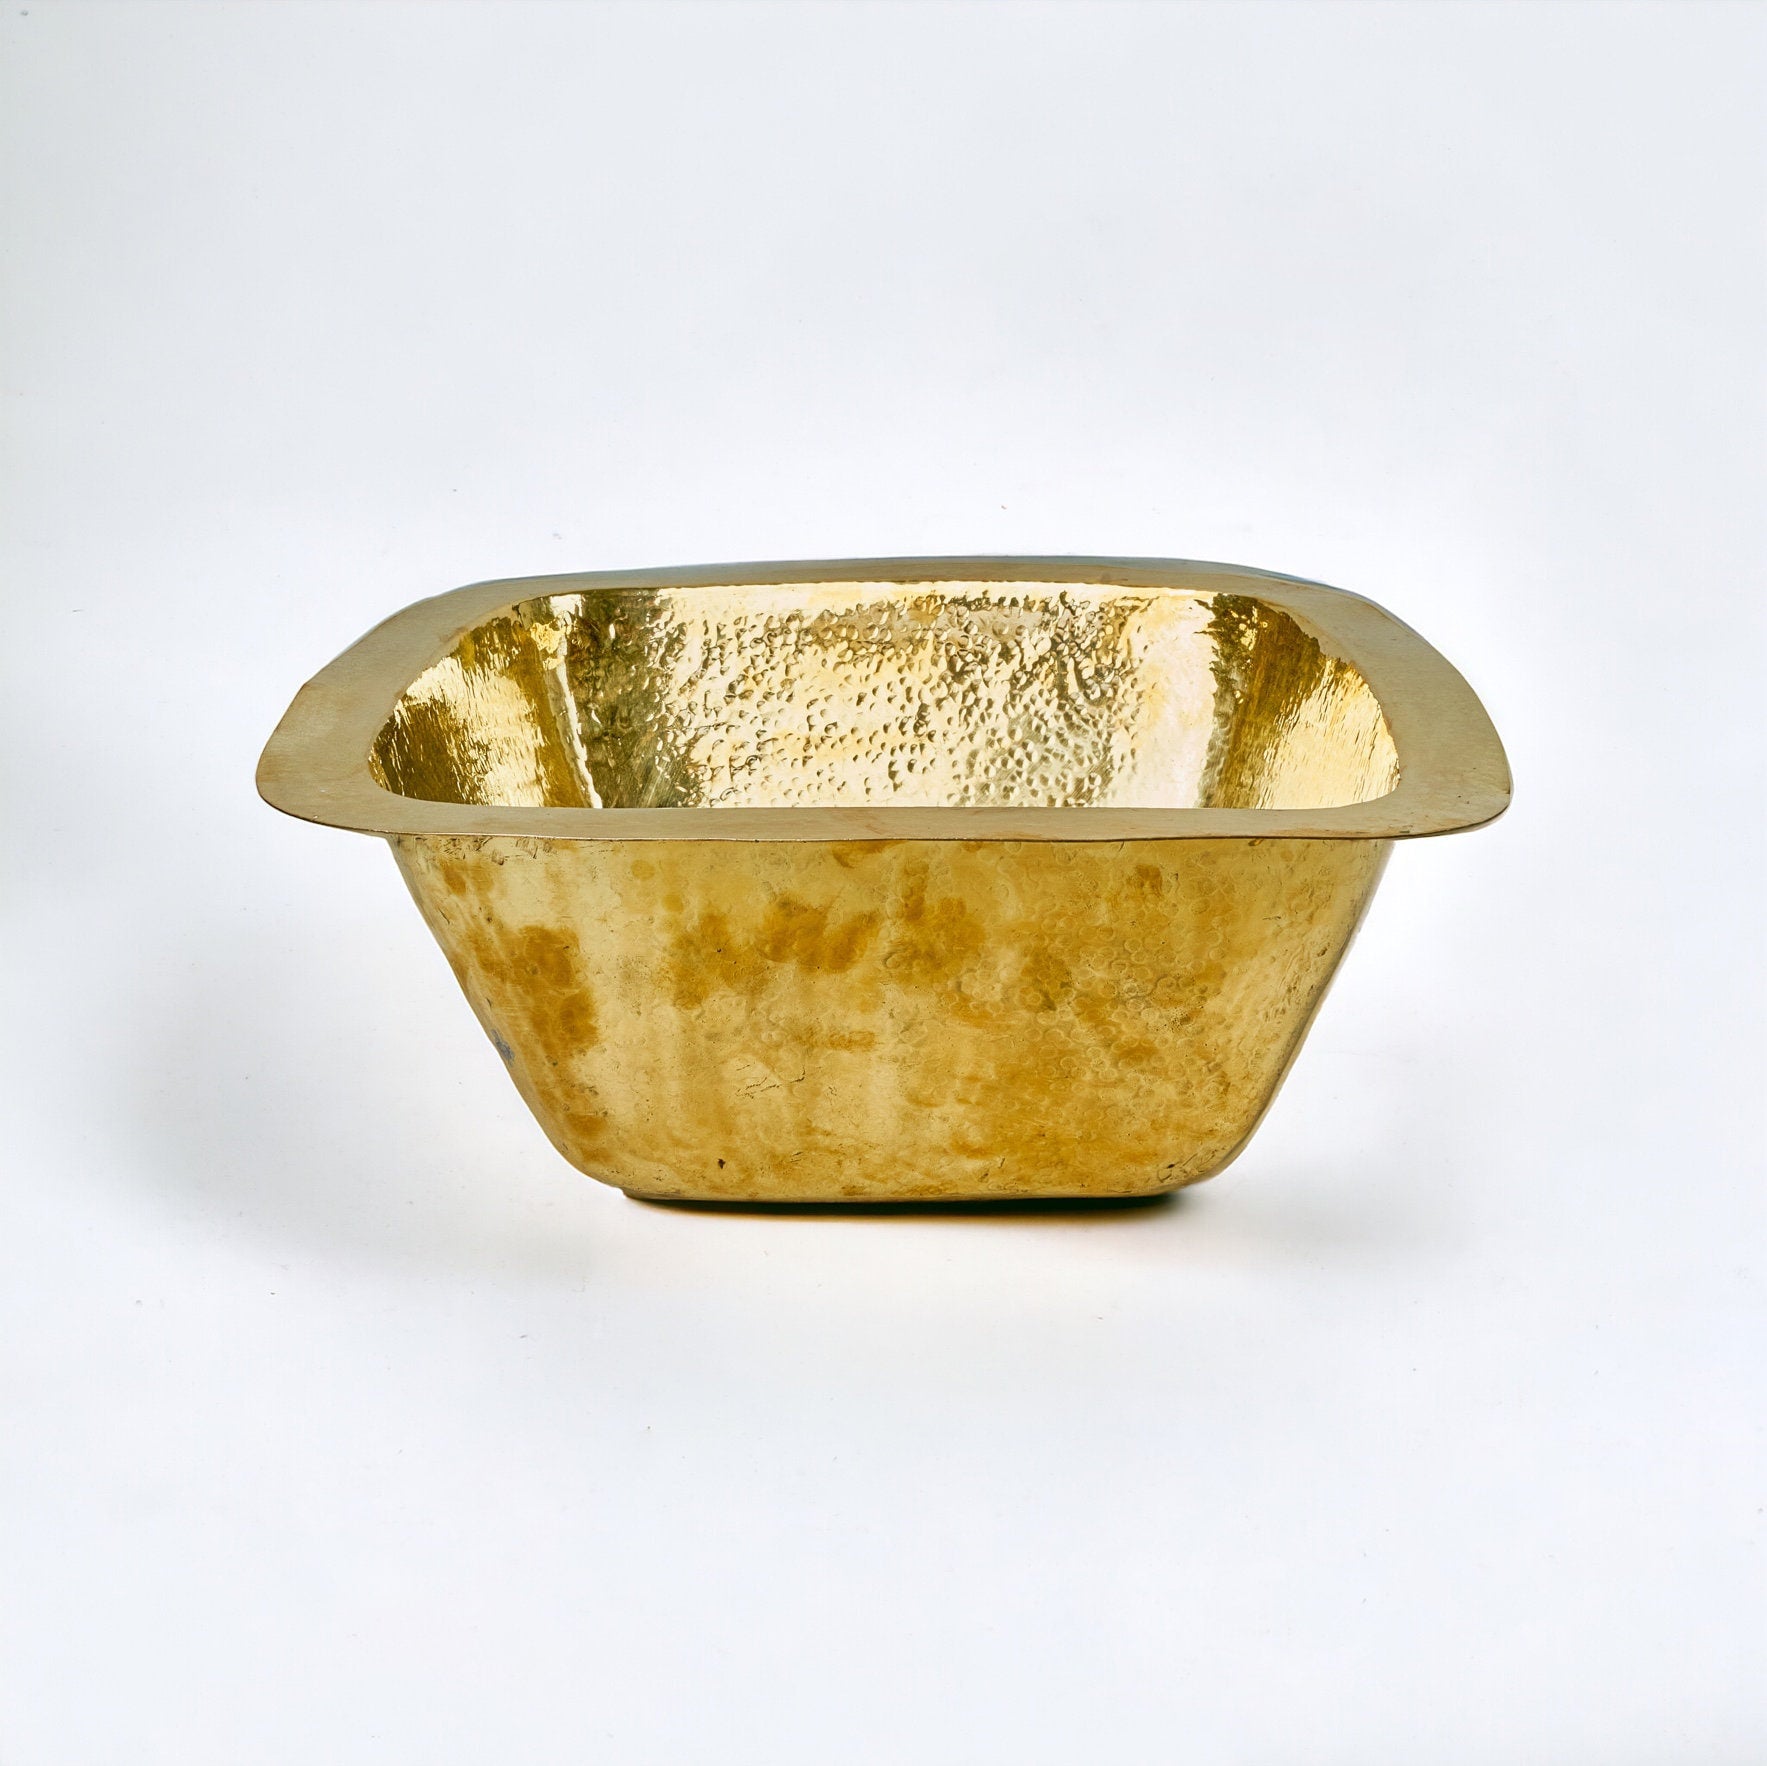 Unlacquered Brass Square Bar Sink